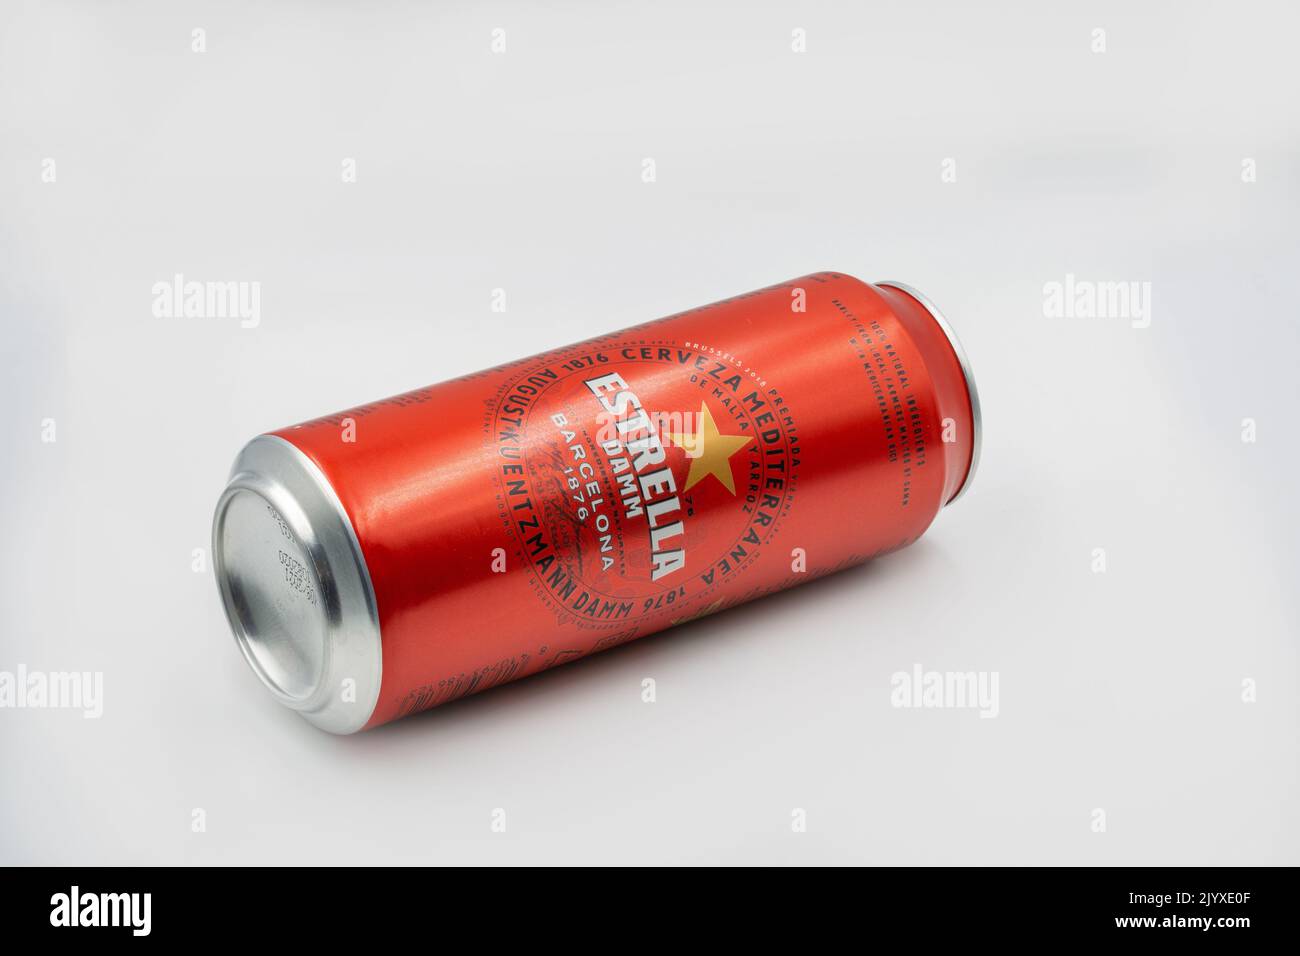 Kyiv, Ukraine - June 10, 2021: Studio shoot of Spanish beer Estrella can from manufacturer Barcelona brewery S.A. Damm closeup on white. Stock Photo